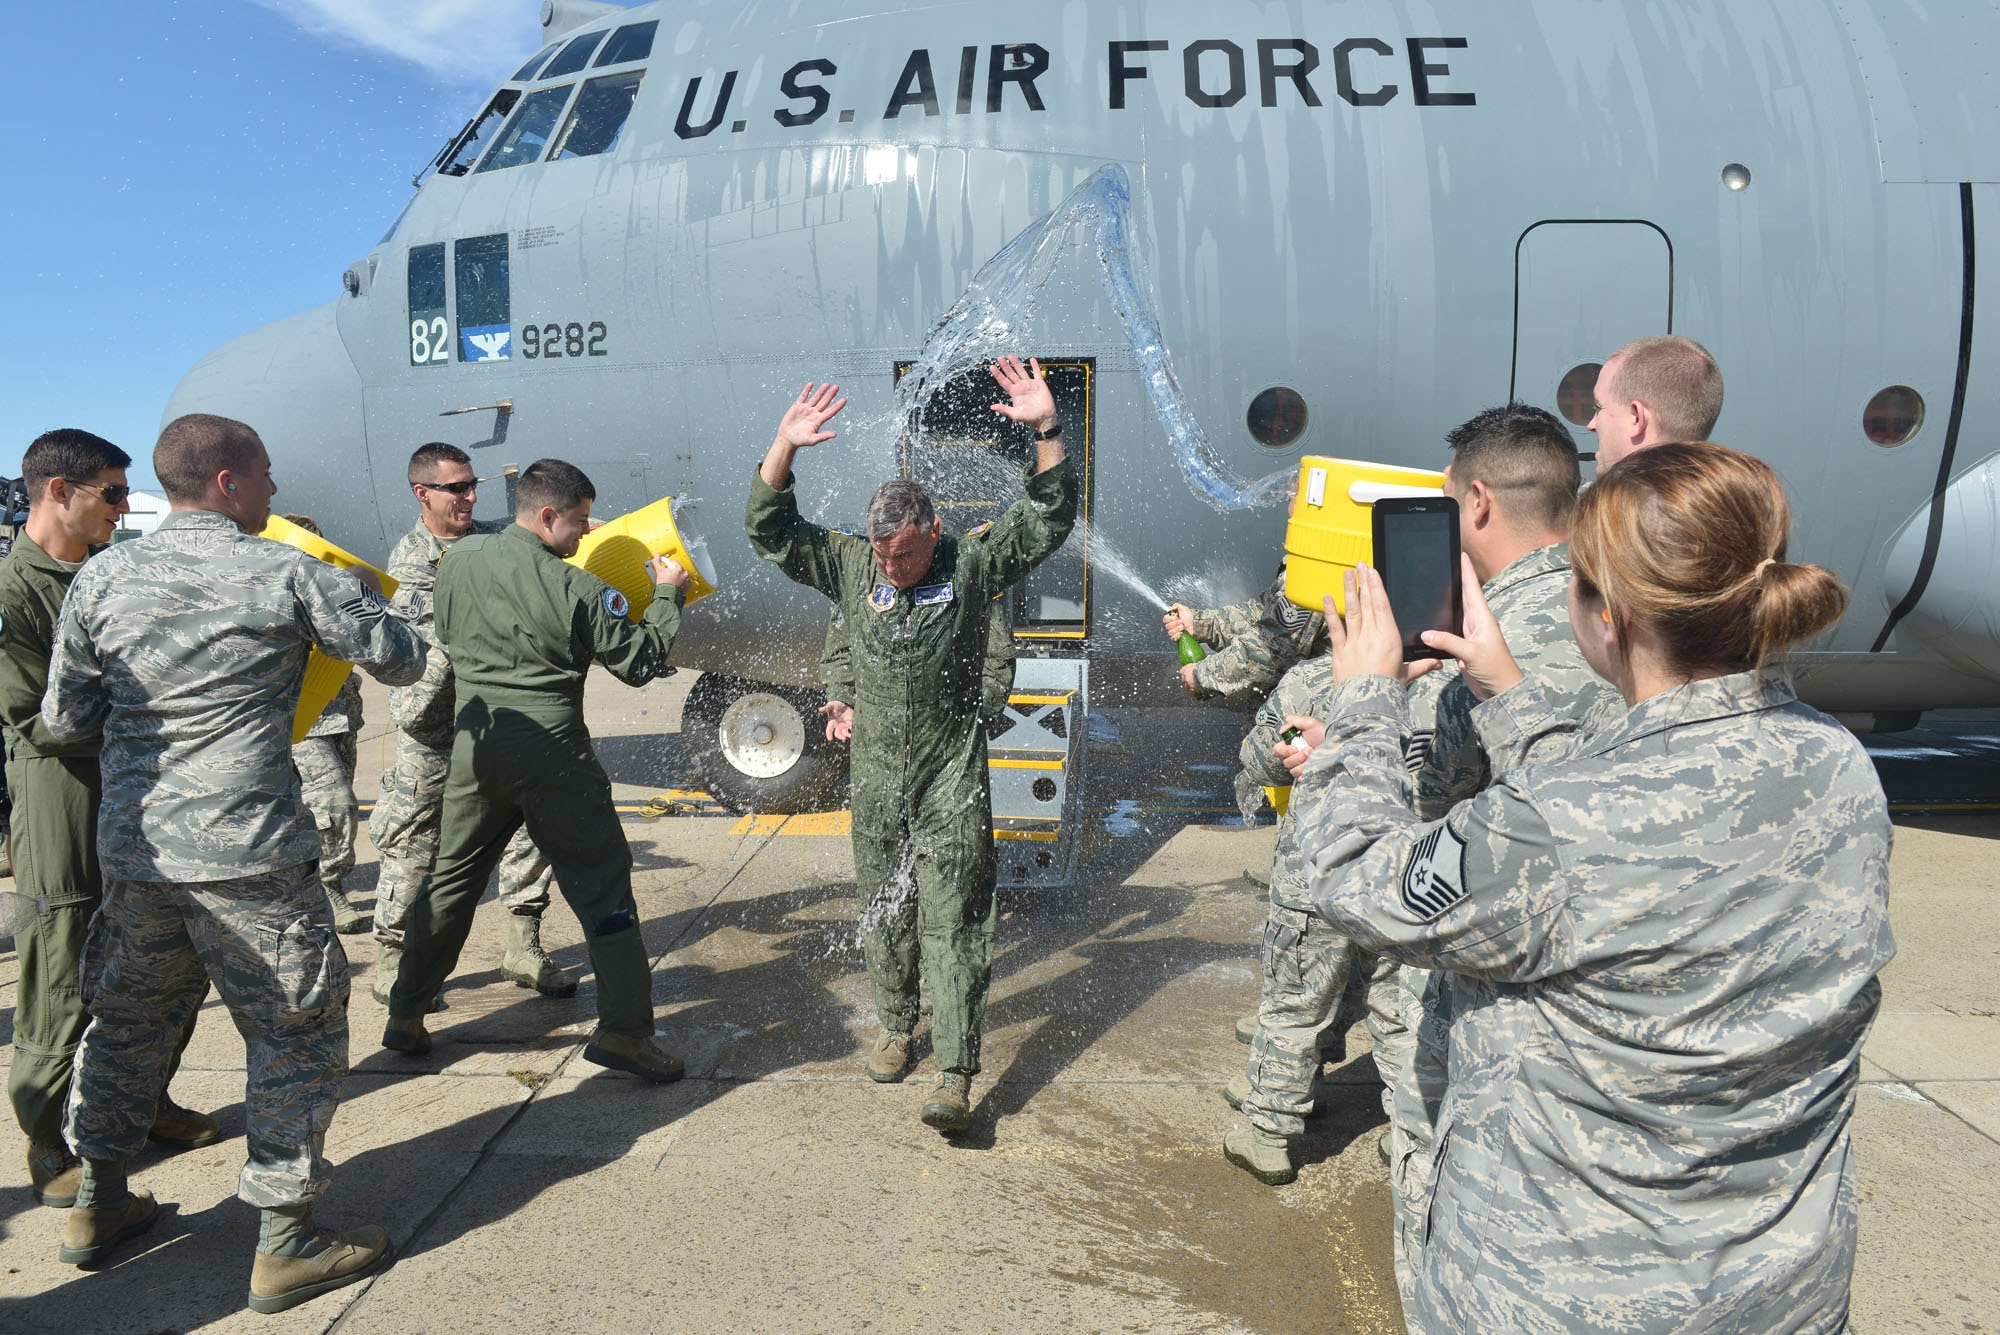 New York Air National Guard Col. John J. Higgins, commander of the 107th Airlift Wing, is doused by his comrades as he steps off of the aircraft following his "fini flight," his final flight as a navigator. It was the 107th Airlift Wing's final flight in a C-130 before converting to the MQ-9 mission. (U.S. Air National Guard Photo/Staff Sgt. Ryan Campbell)